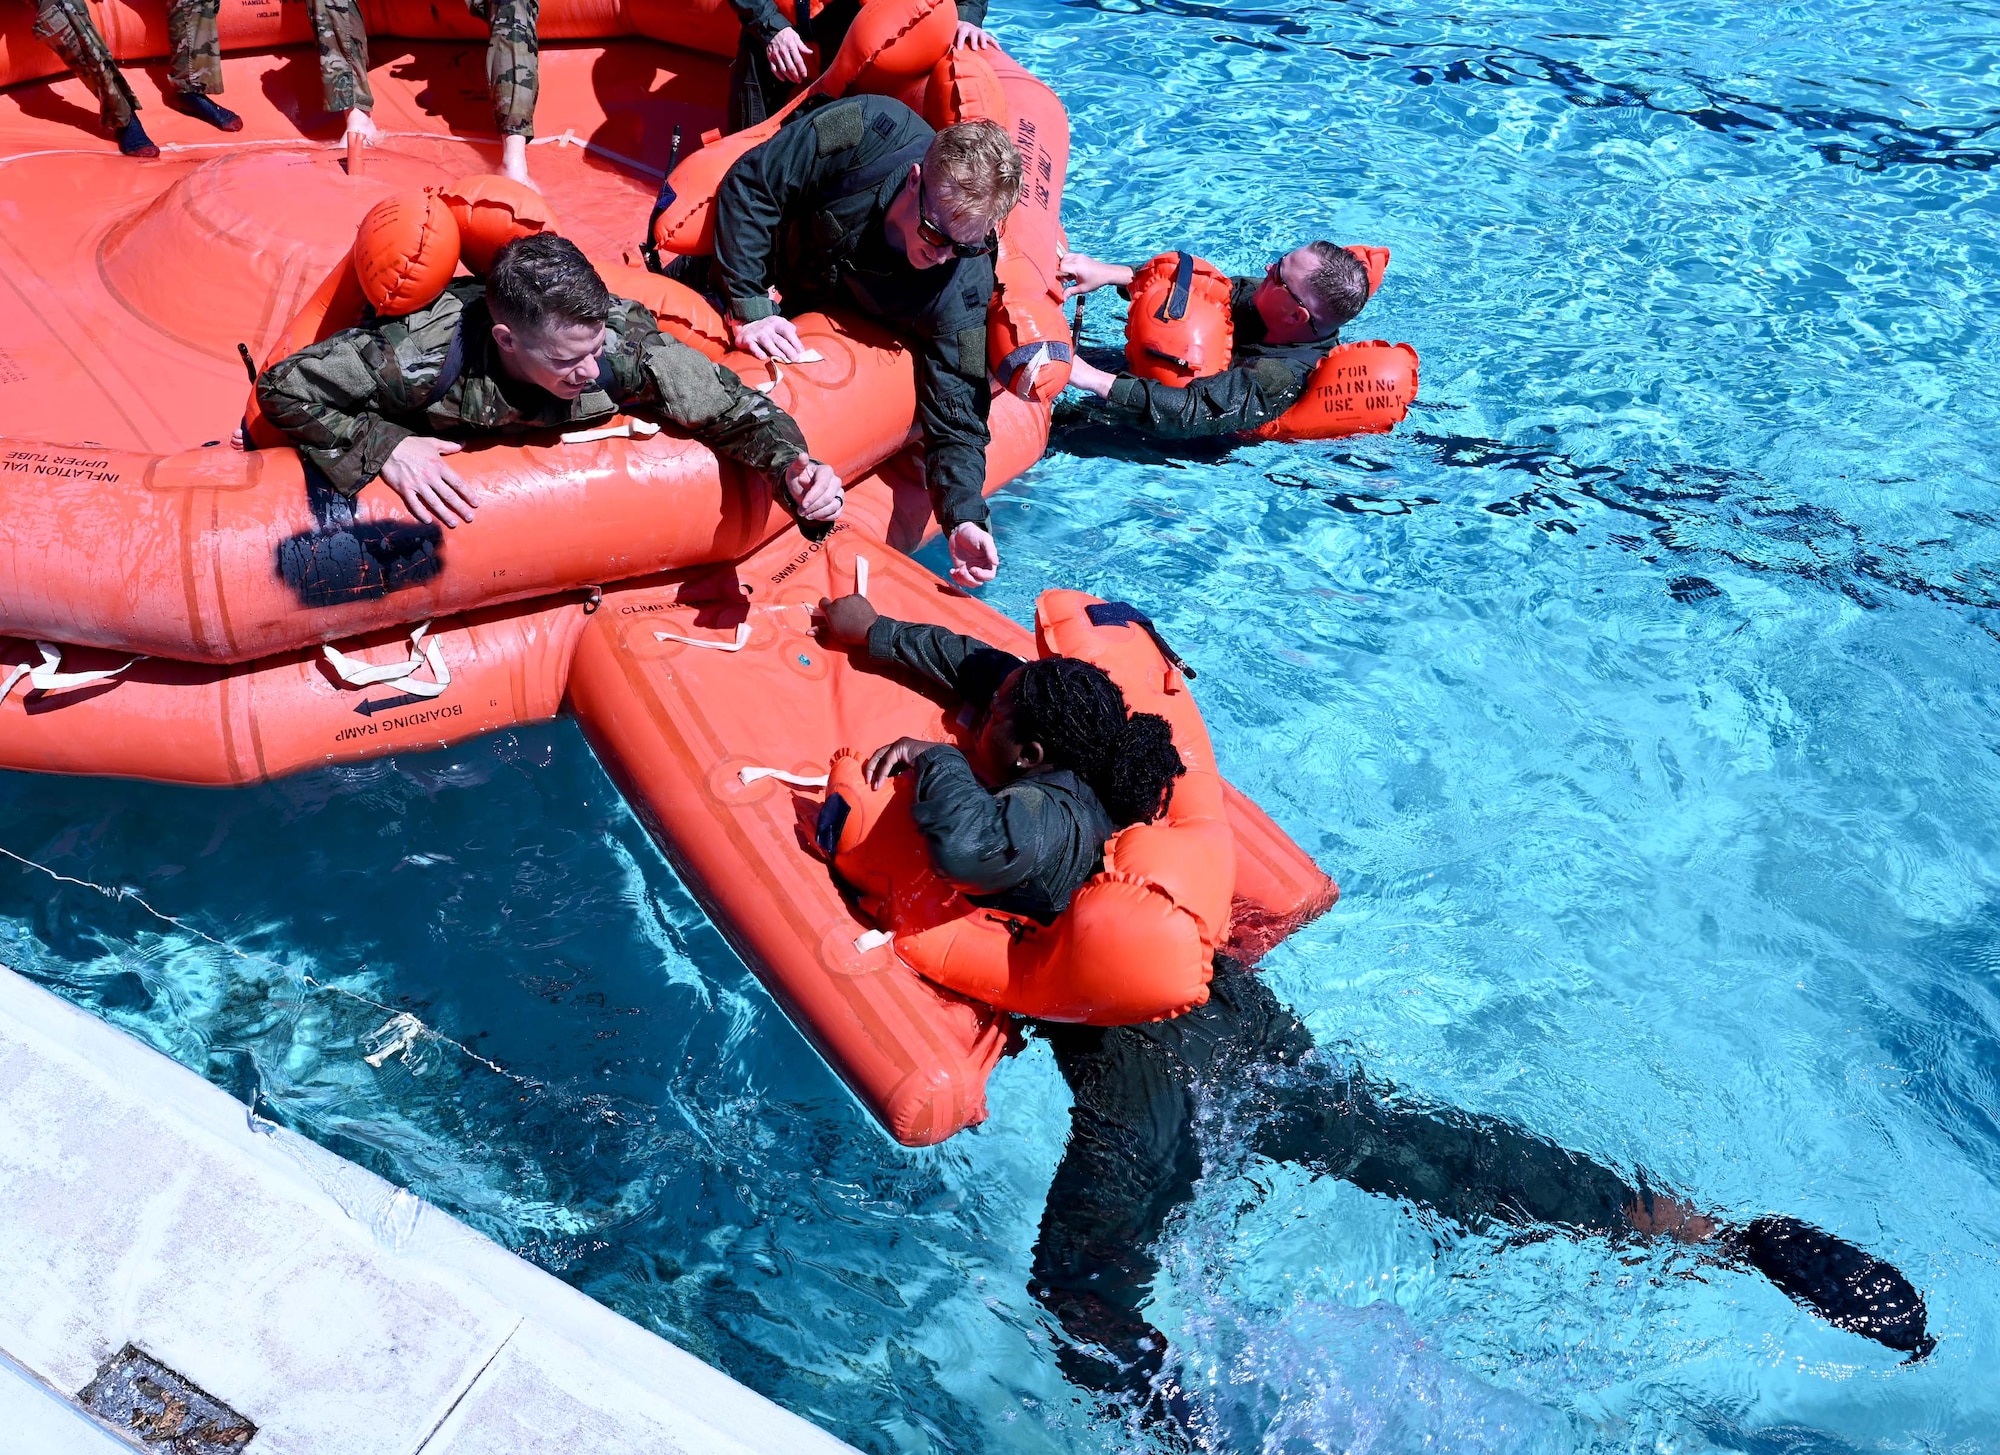 members pull someone onto a flotation device